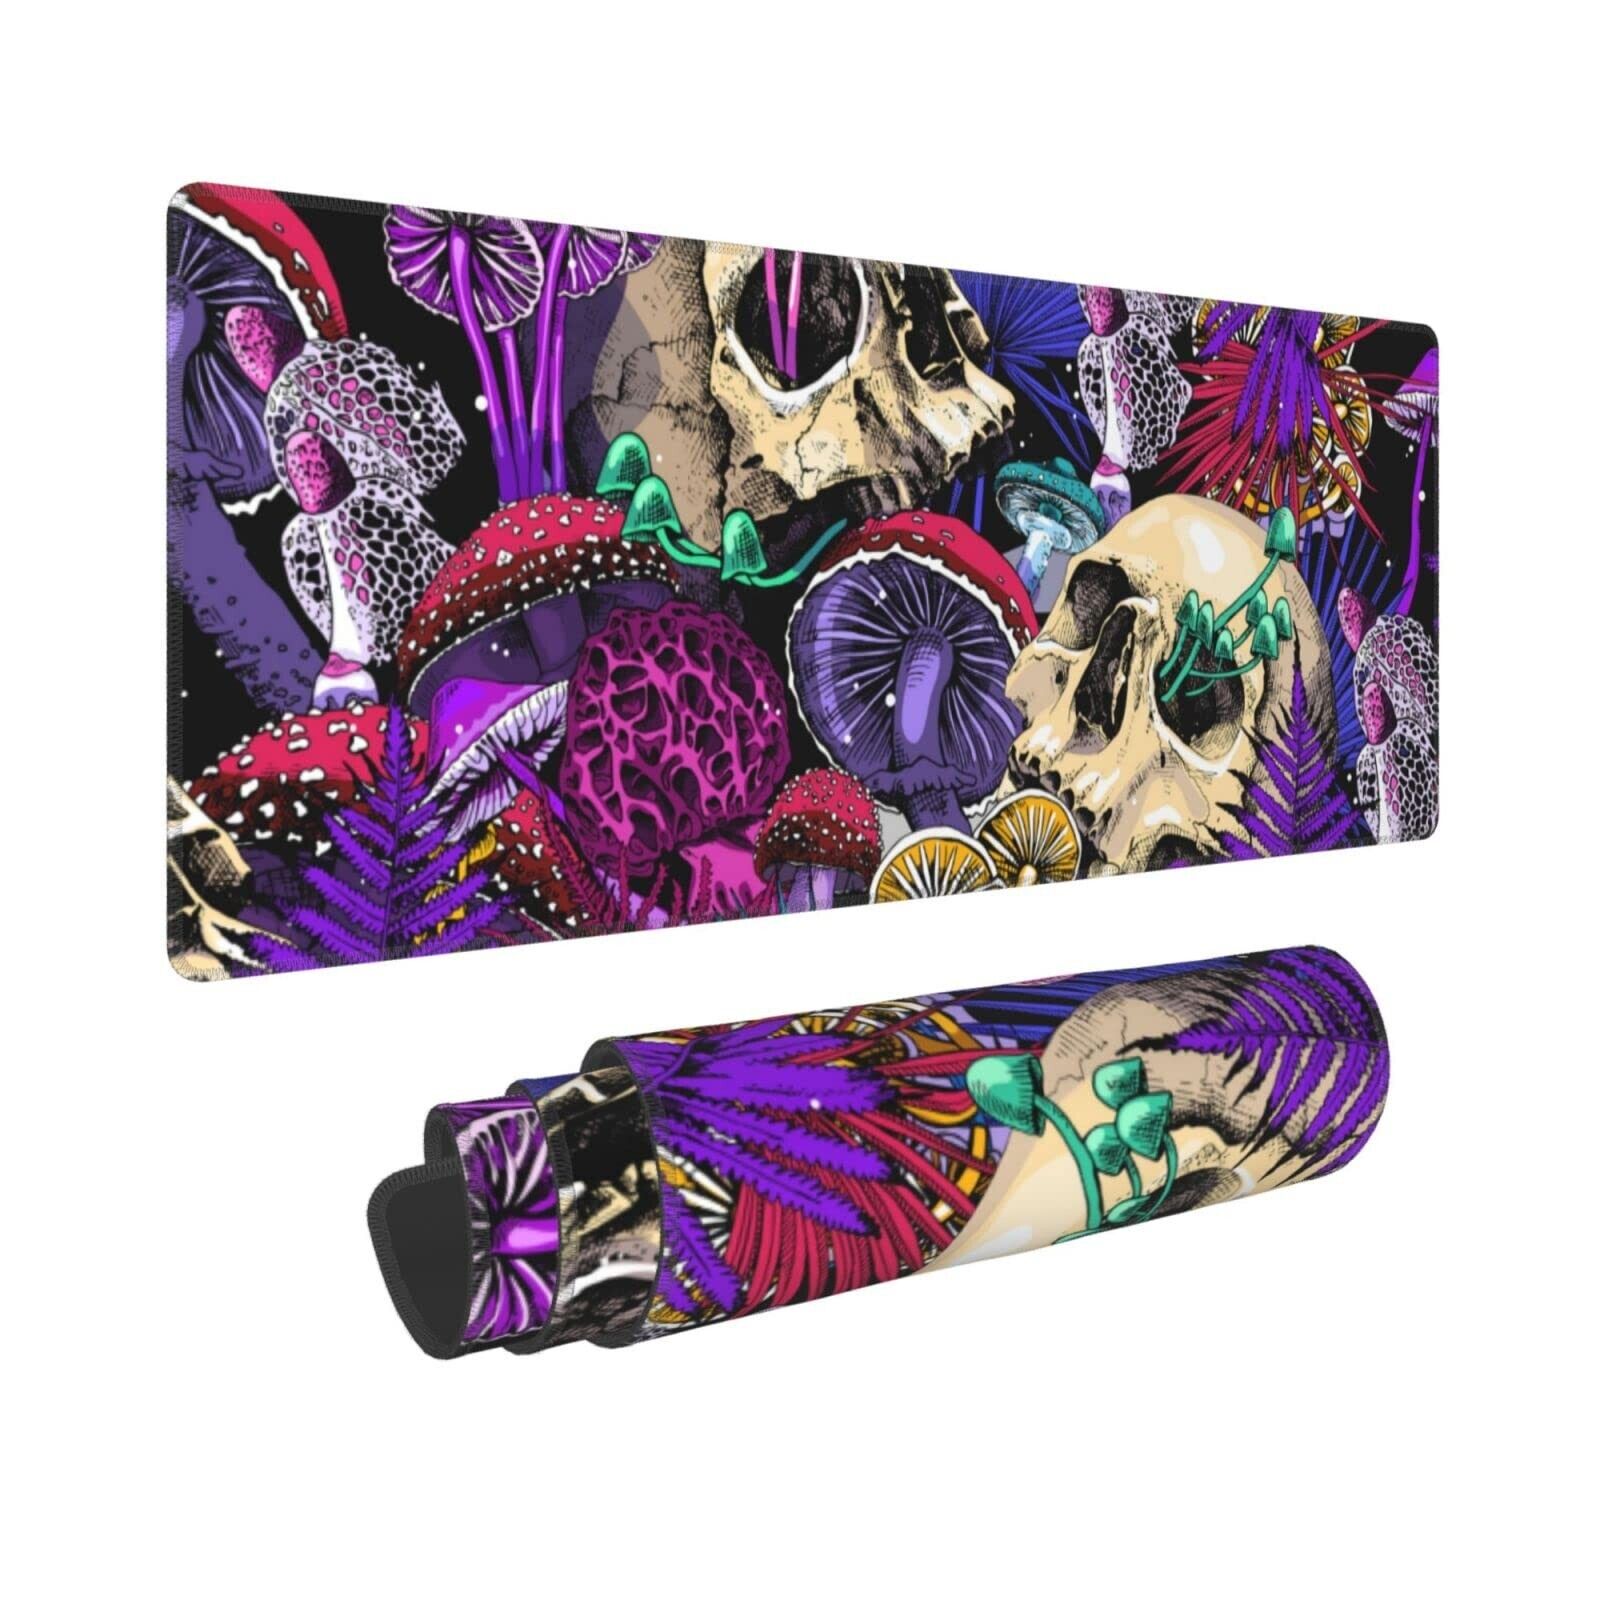 Psychedelic Mushrooms Cute Skull XXL XL Large Gaming Mouse Pad for Desk, Non-...